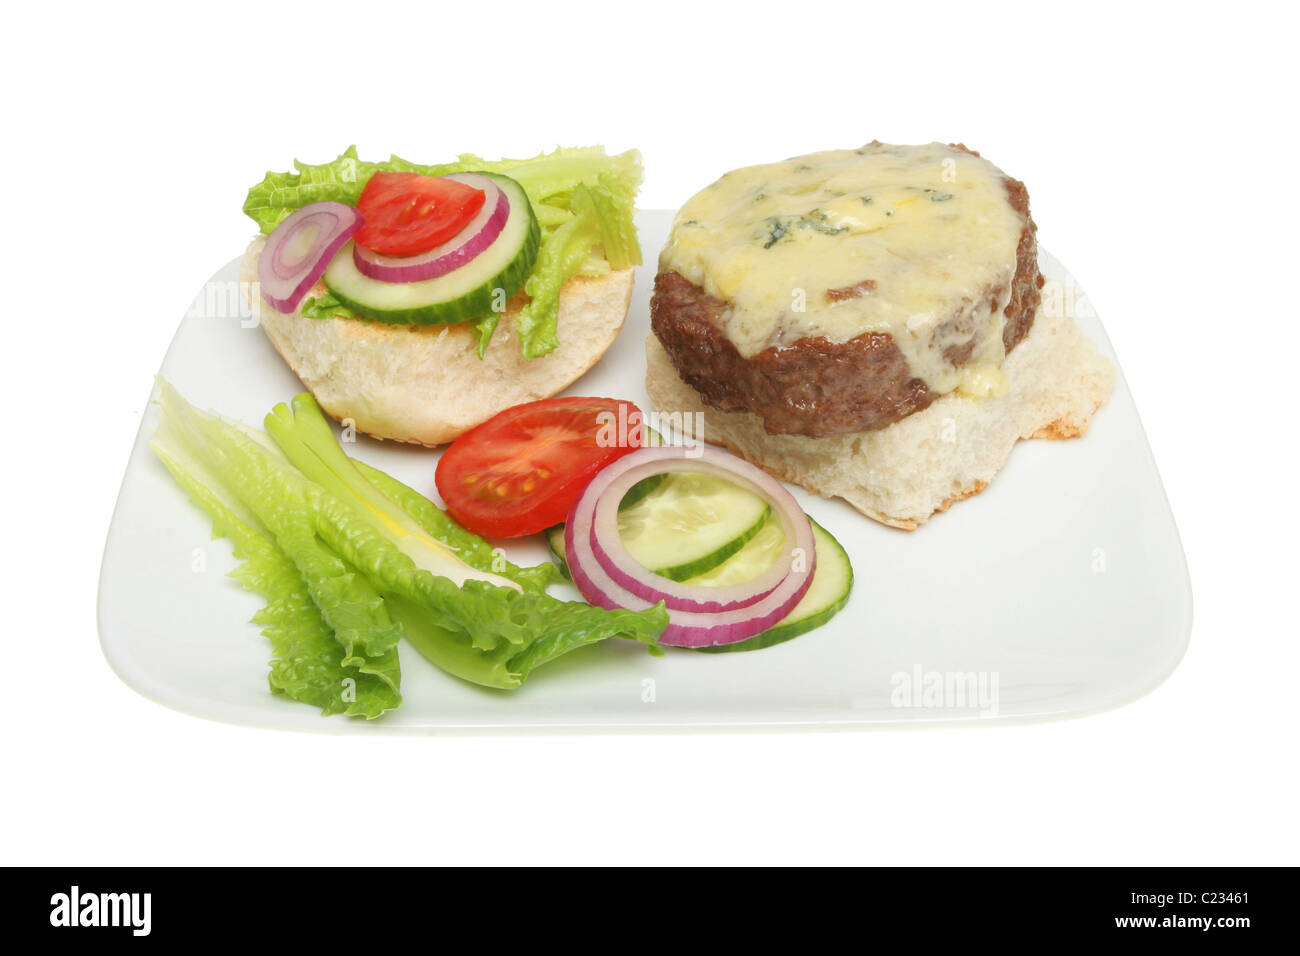 Open cheese burger and salad garnish on a plate Stock Photo